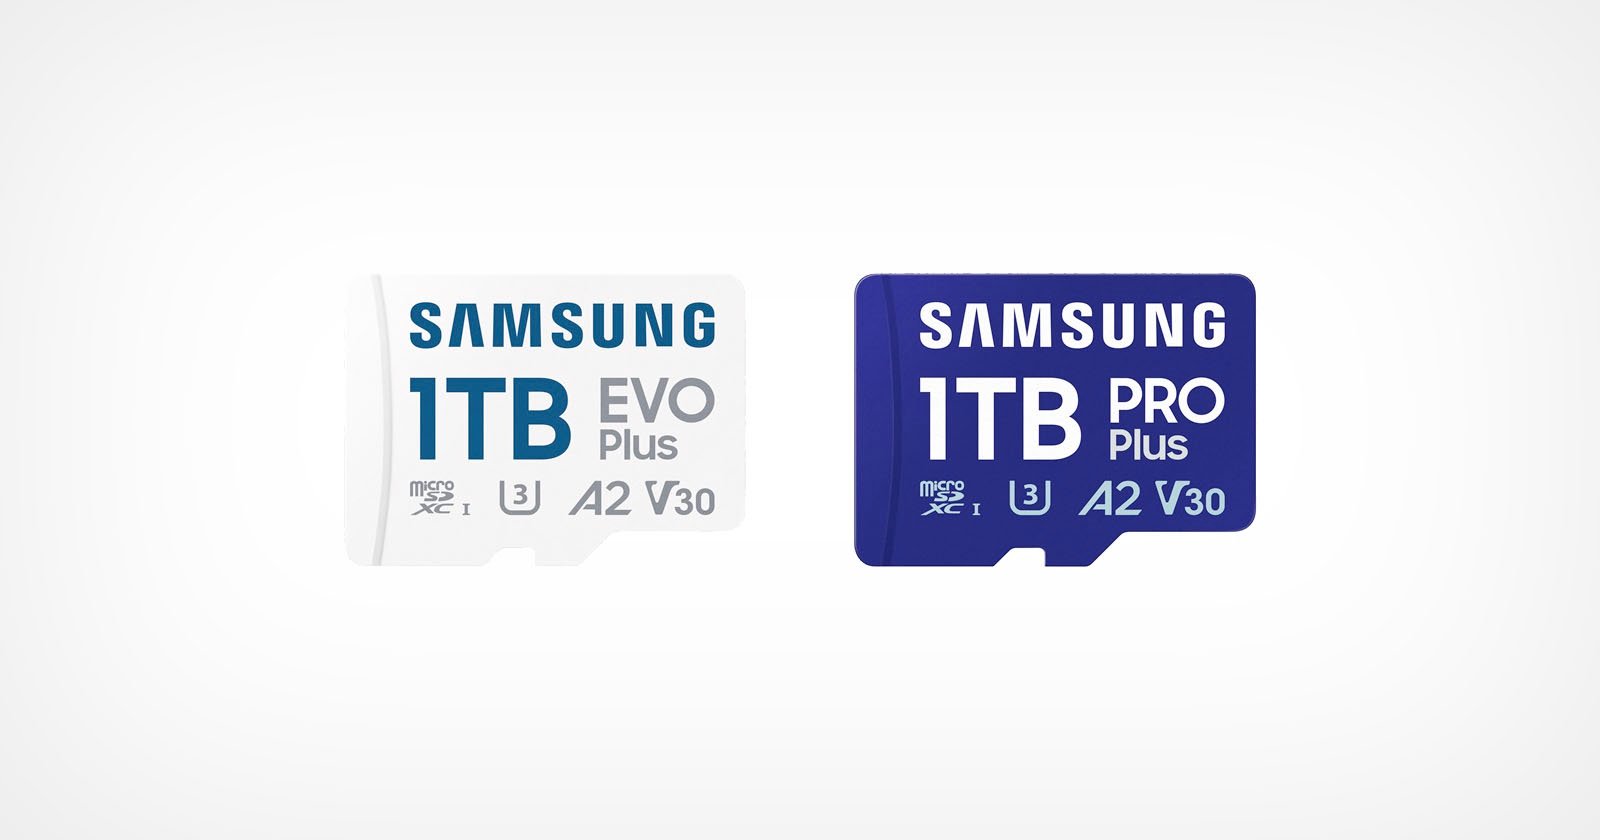 Samsung’s New 800 MB/s microSD Card is World’s First to Use SD Express